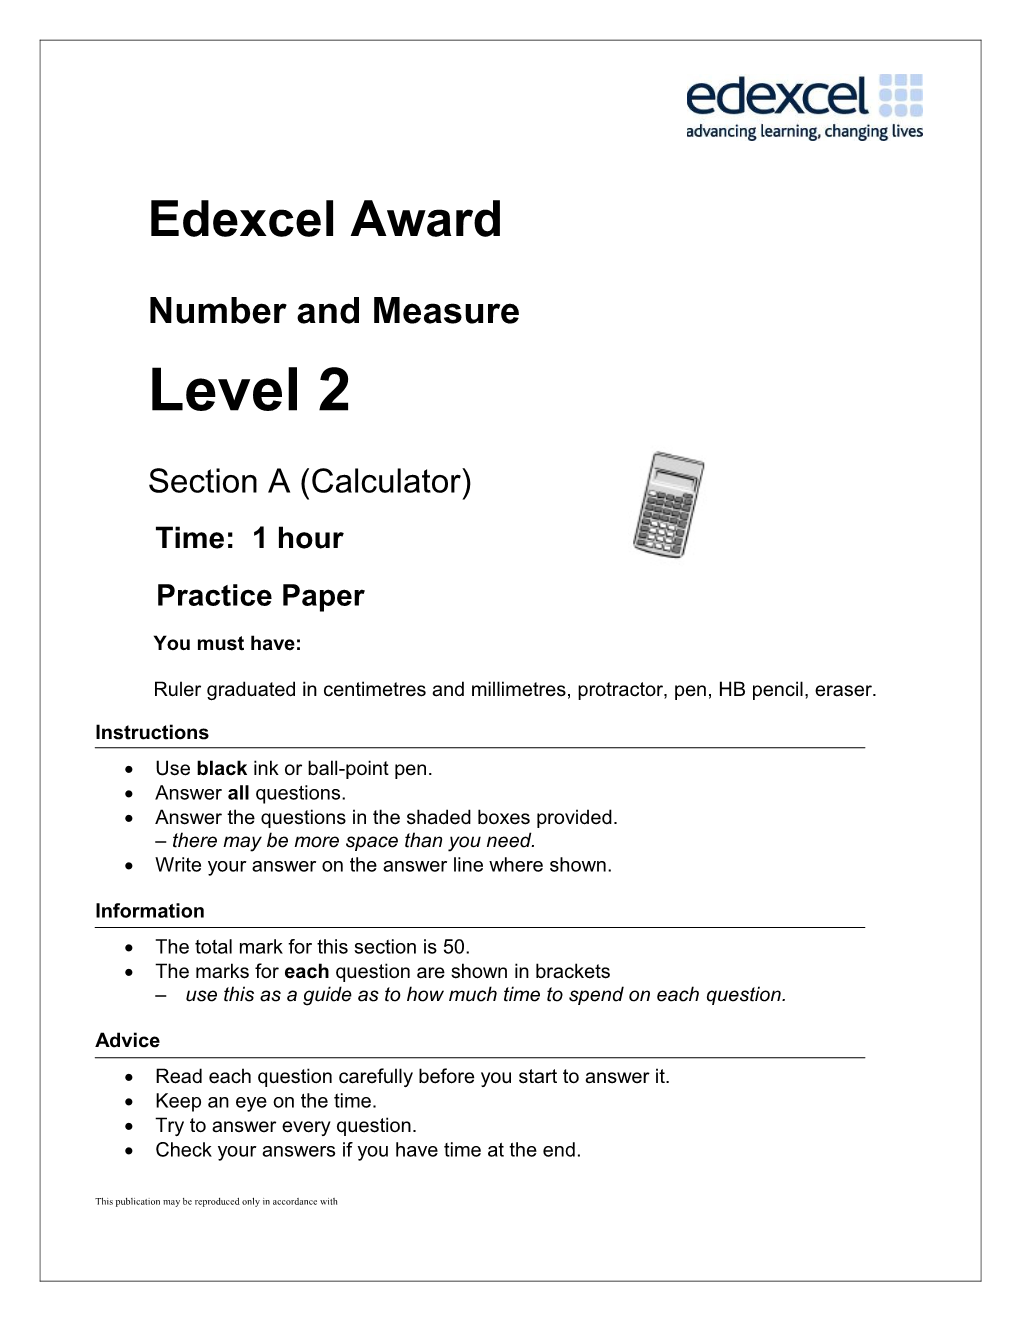 Level 2 Number and Measure Practice Paper